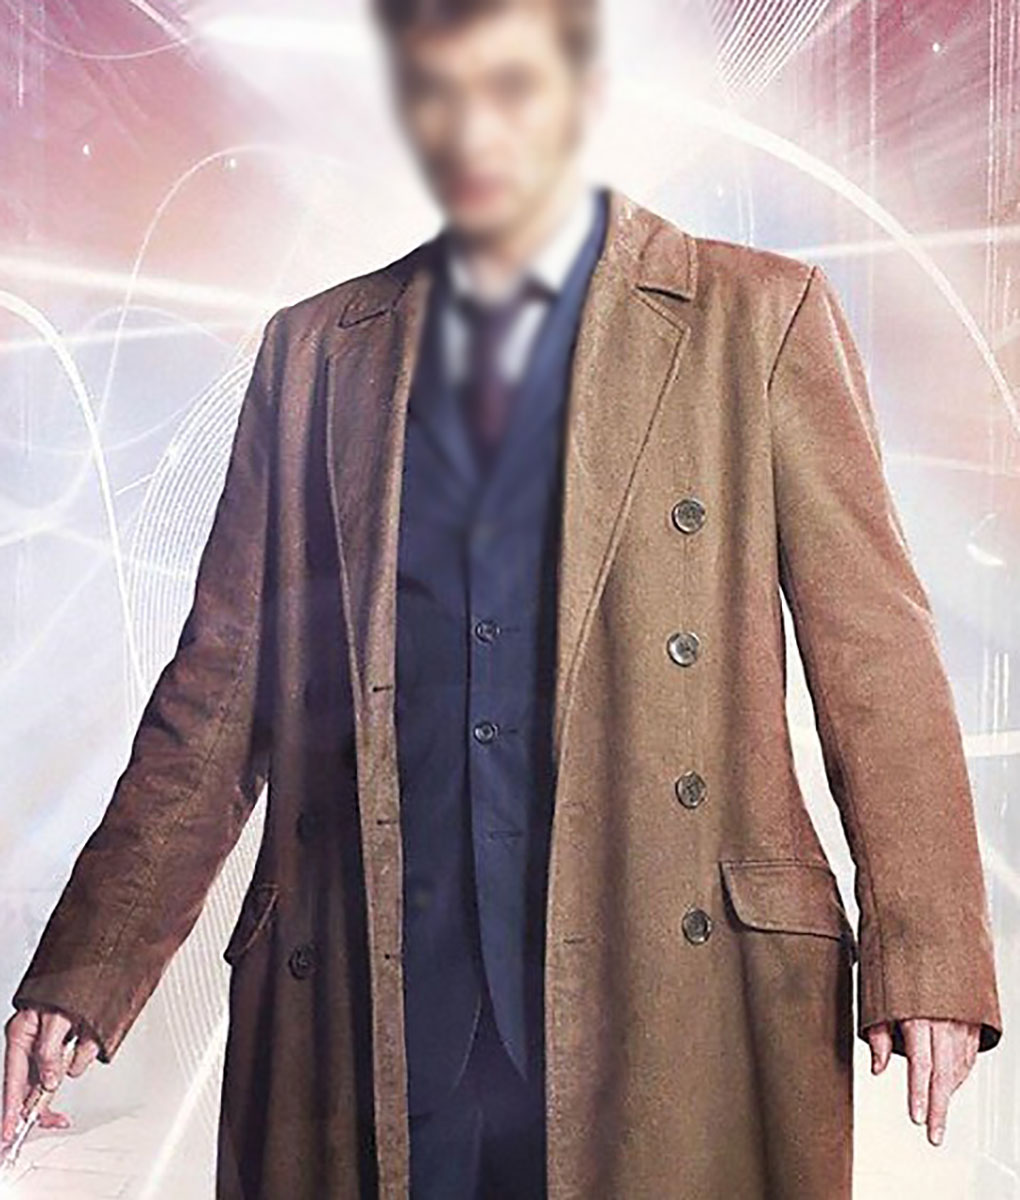 Doctor Who (10th Doctor) Brown Trench Coat